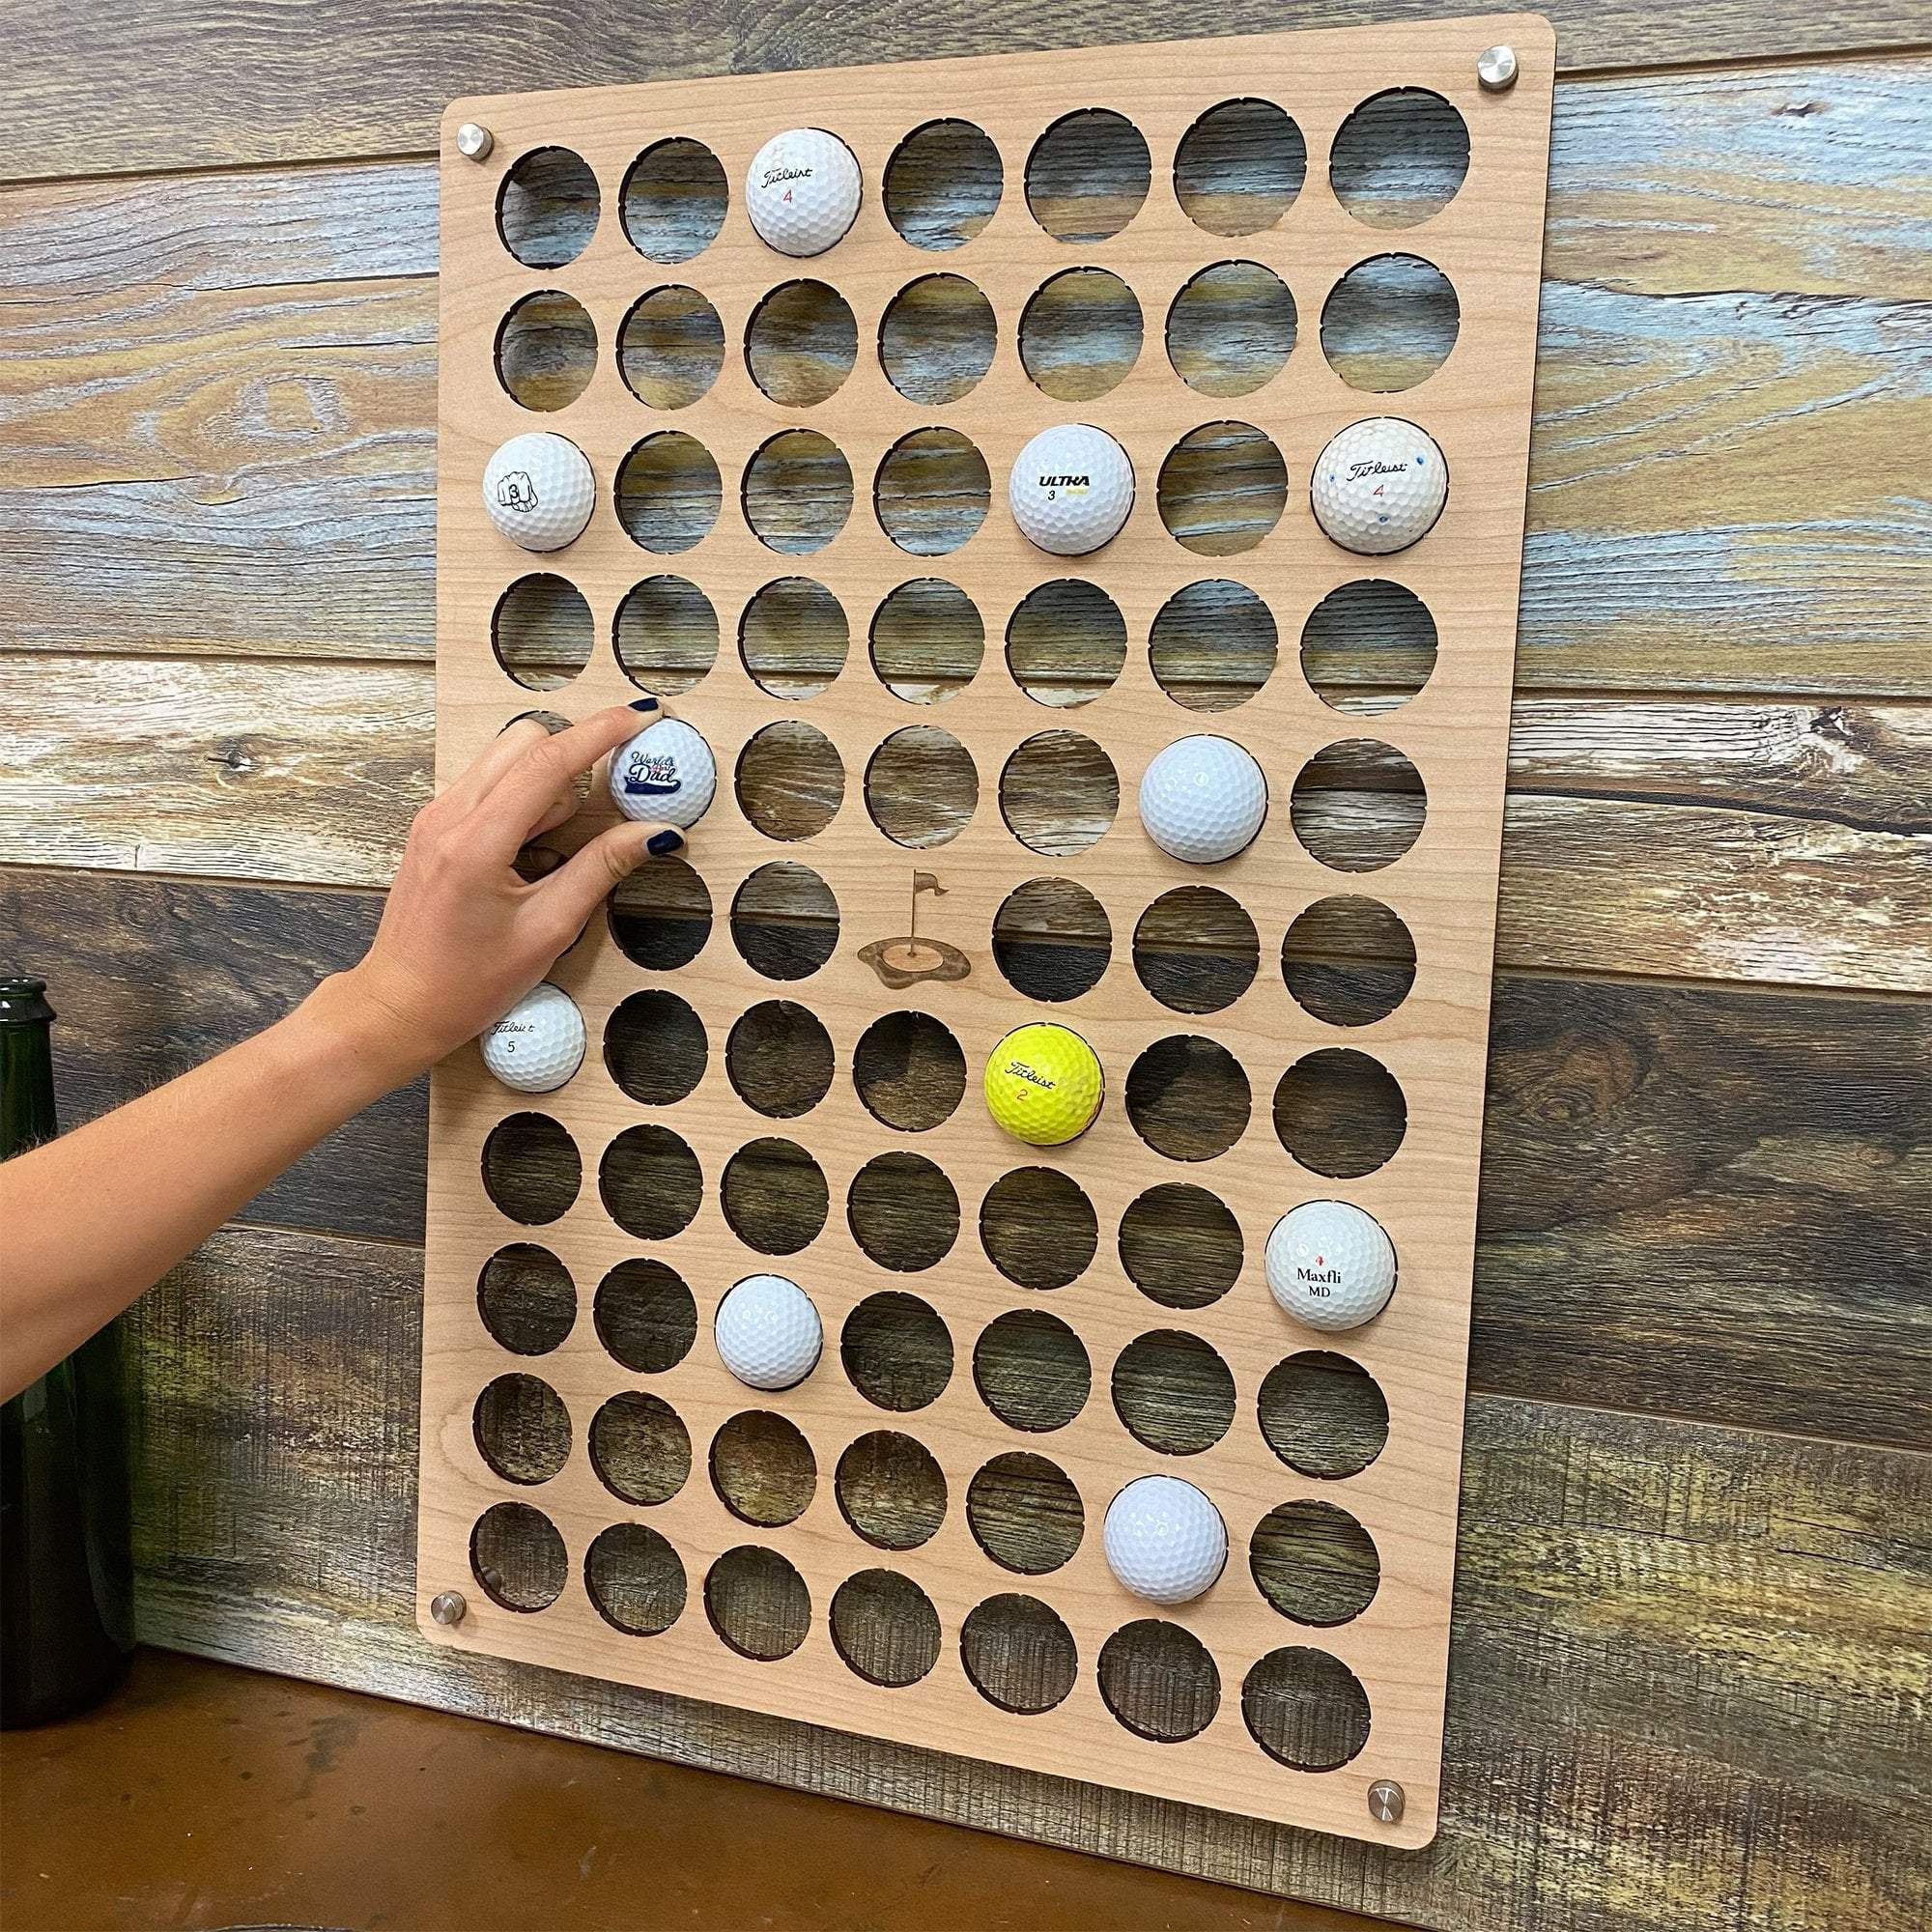 Personalized Golf Ball Display Holder- Holds 30 Golf Balls